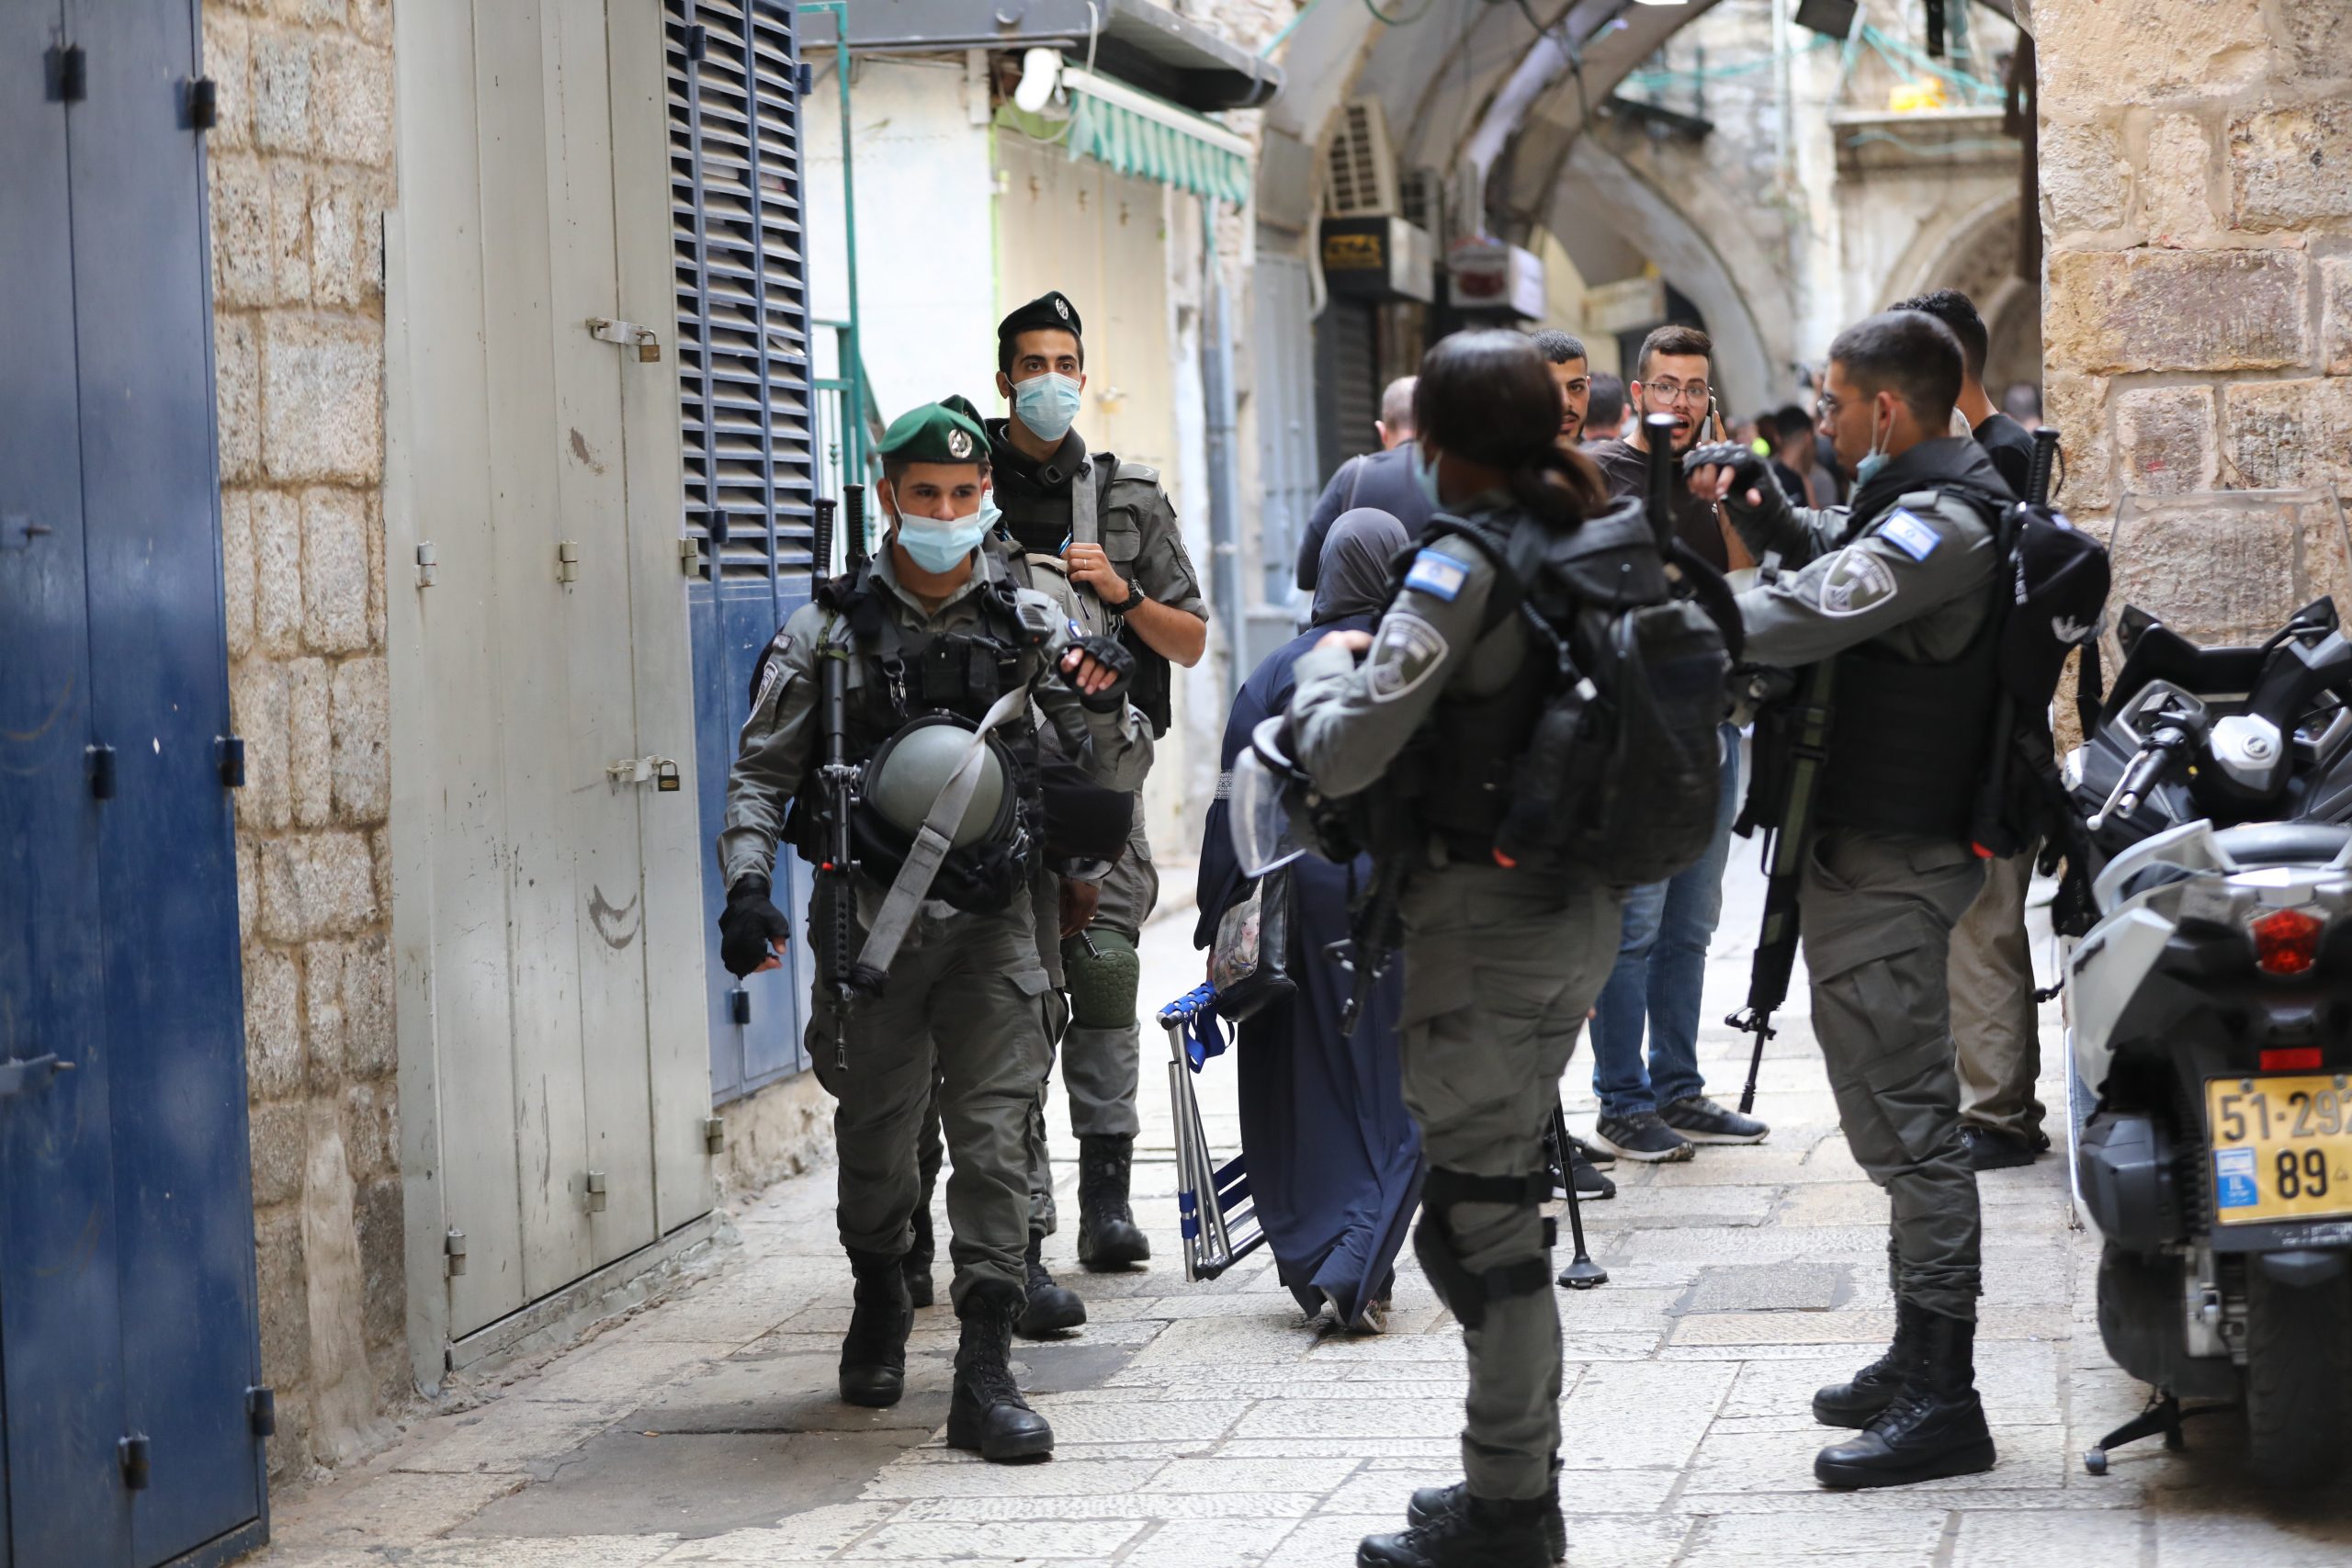 epa09459812 Israeli border police stand guard at the site where a stabbing attack took place in the Old City of Jerusalem, 10 September 2021. A Palestinian man attempted to stab Israeli Police officers but was, according to Israeli police.  EPA/ABIR SULTAN